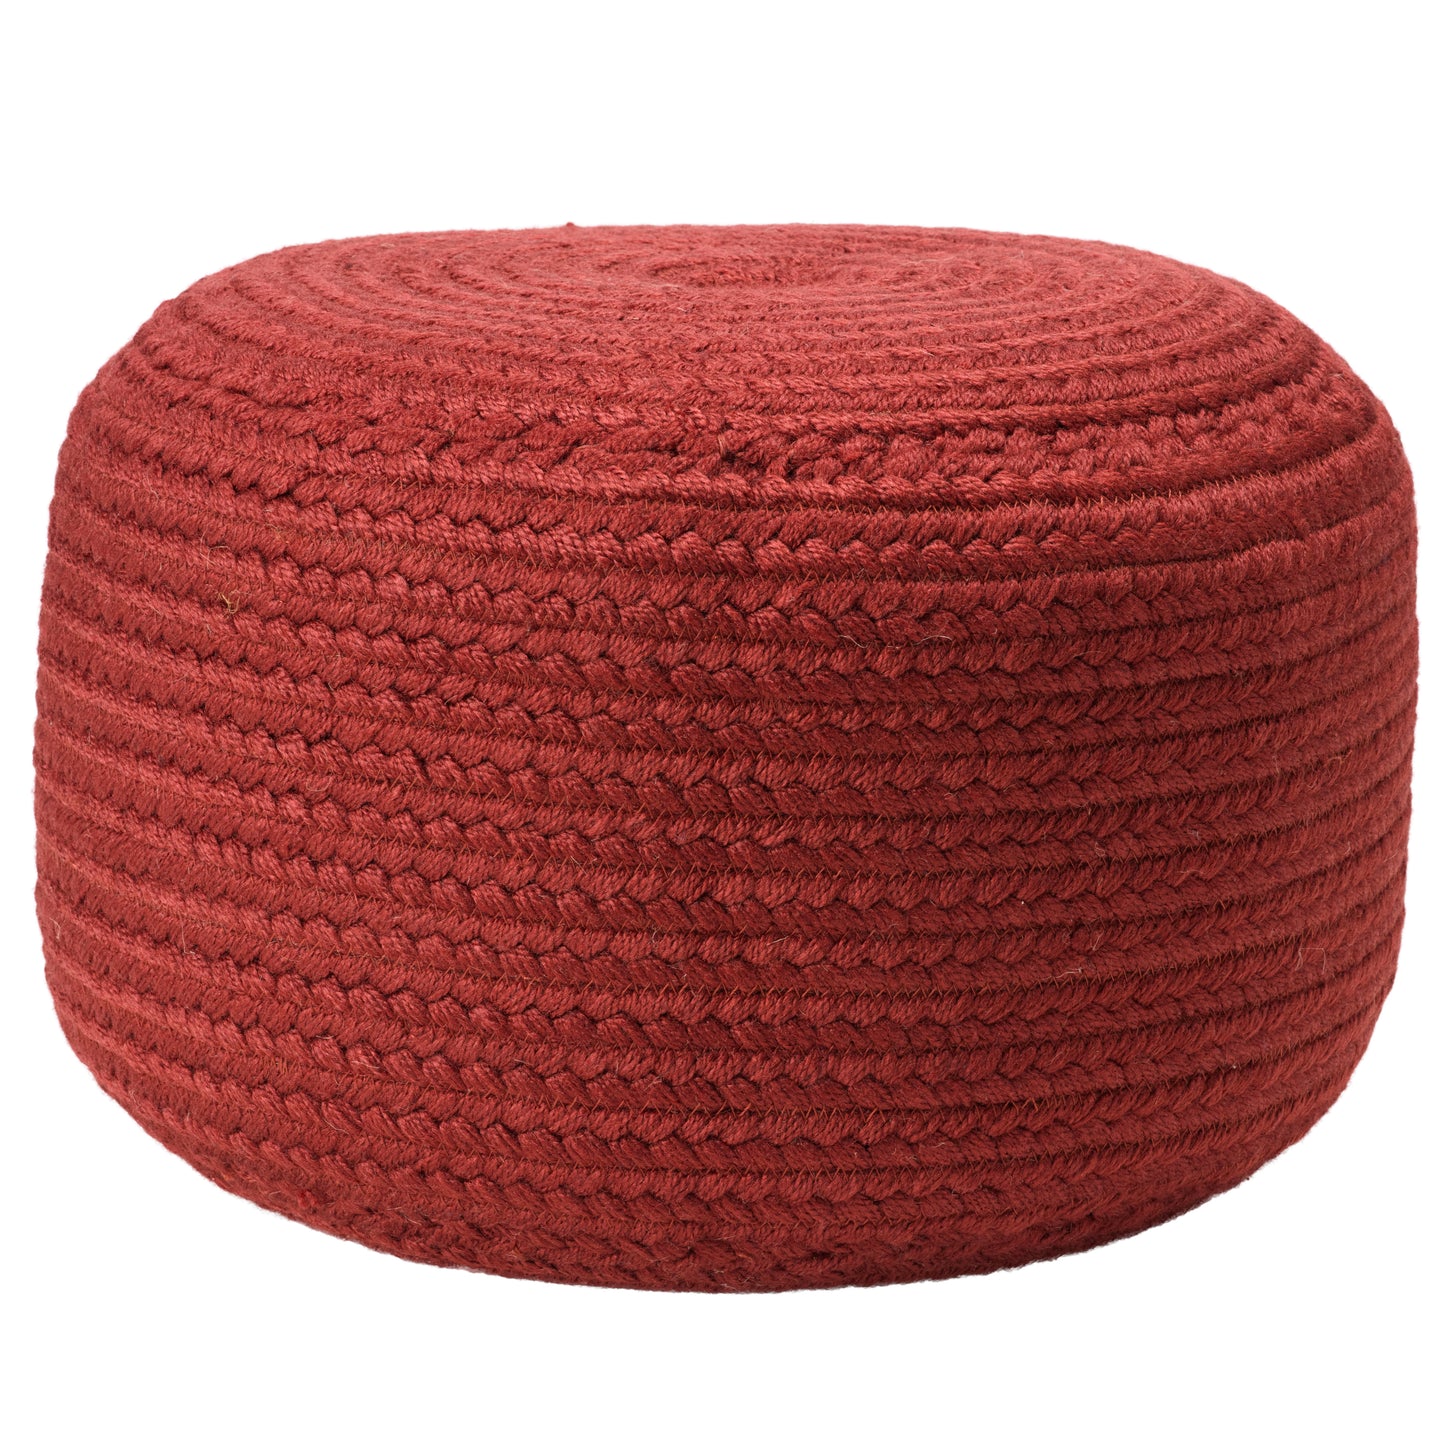 Saba Solar Santa Rosa Handmade Synthetic Blend Outdoor Pouf From Vibe by Jaipur Living